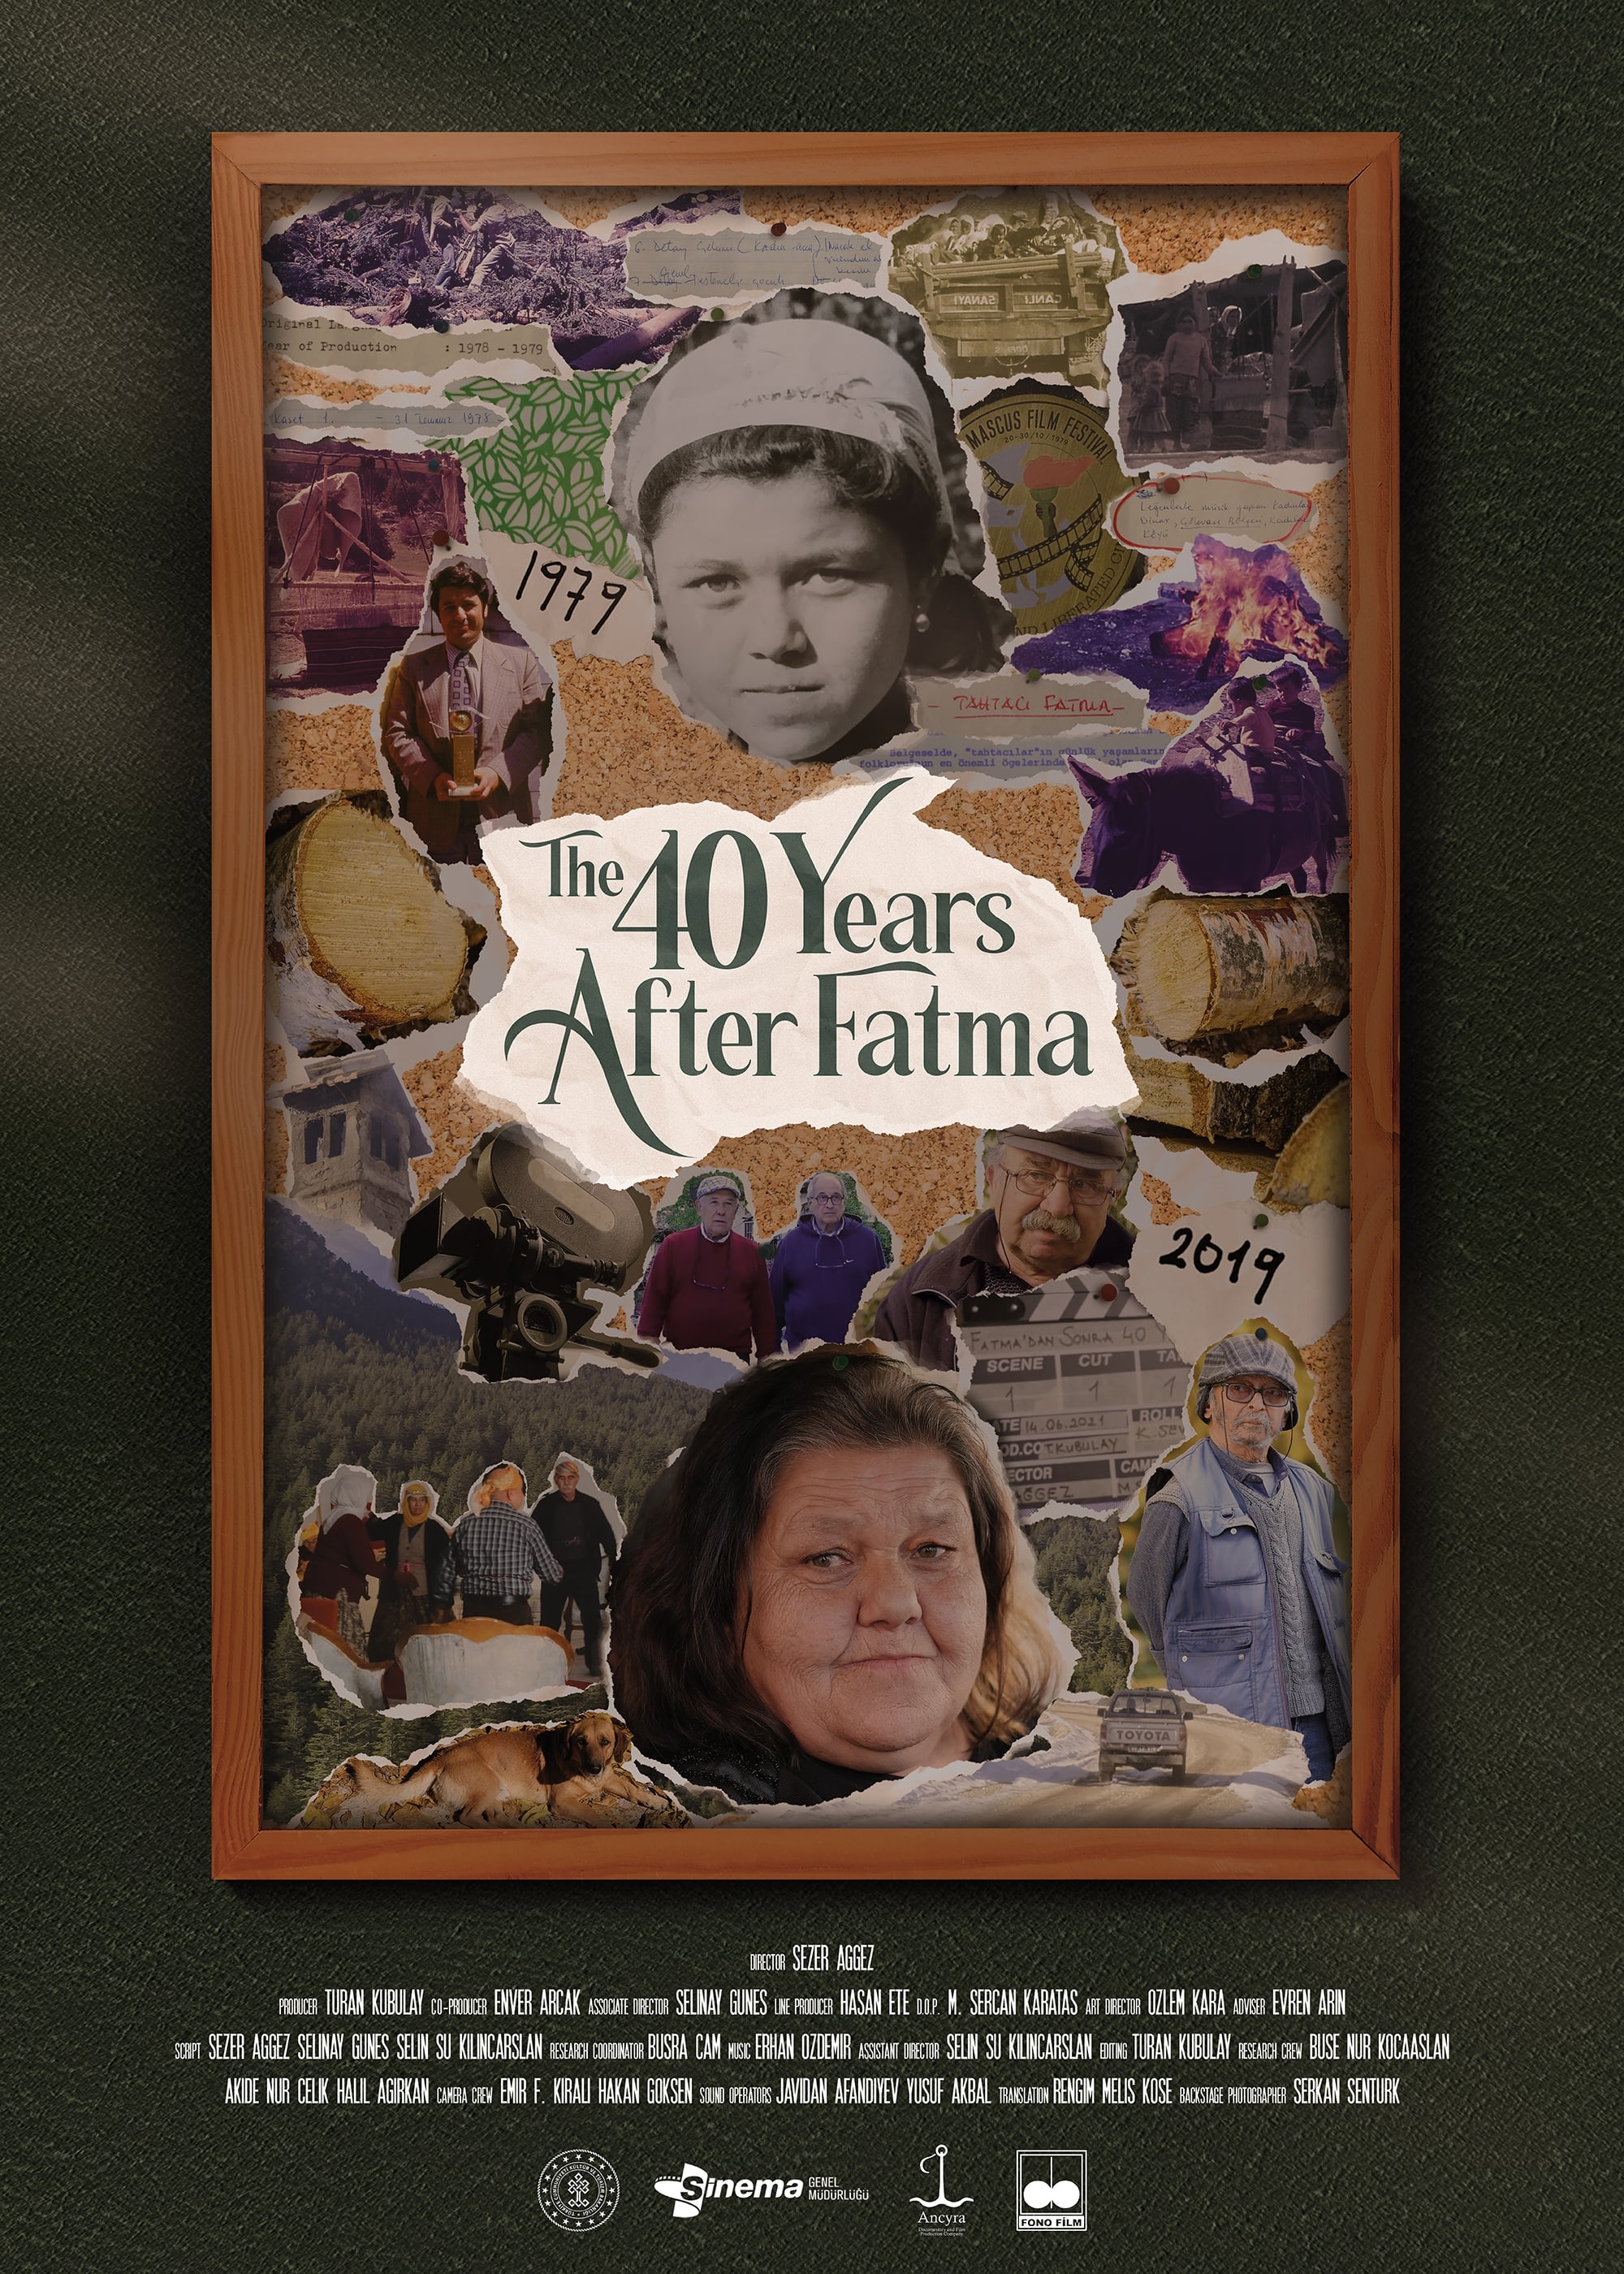 The 40 Years After Fatma